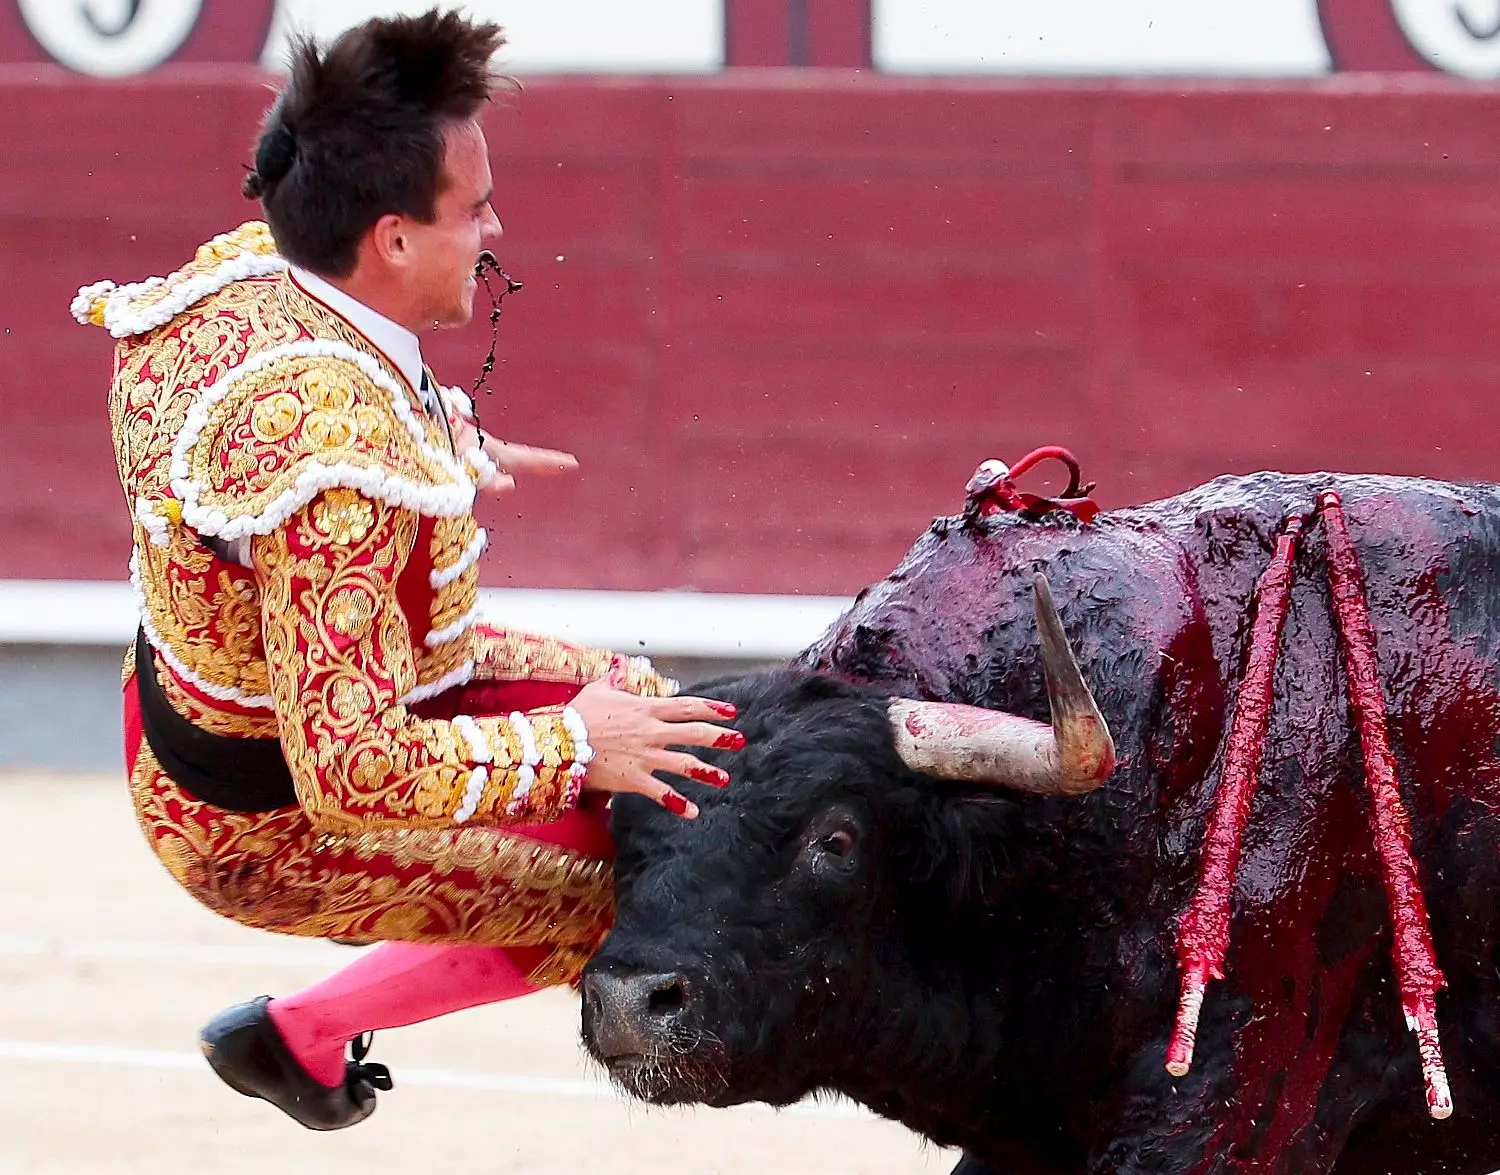 Matador Gonzalo Caballero was treated at the bullring's infirmary before being moved to hospital.